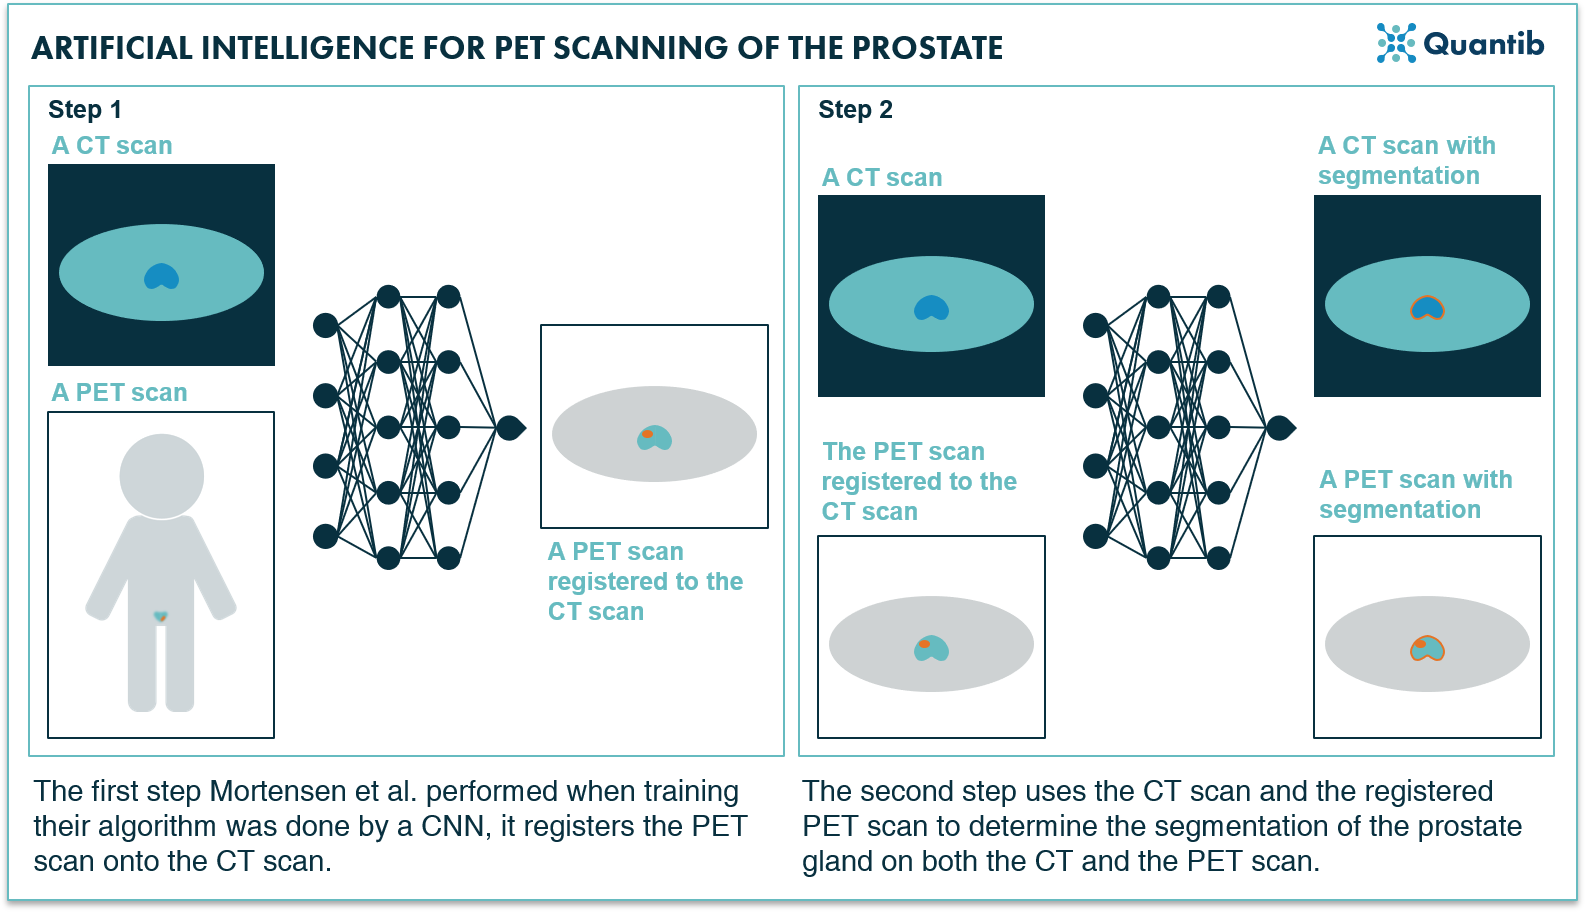 210428 - 5 papers on prostate AI - Image 2